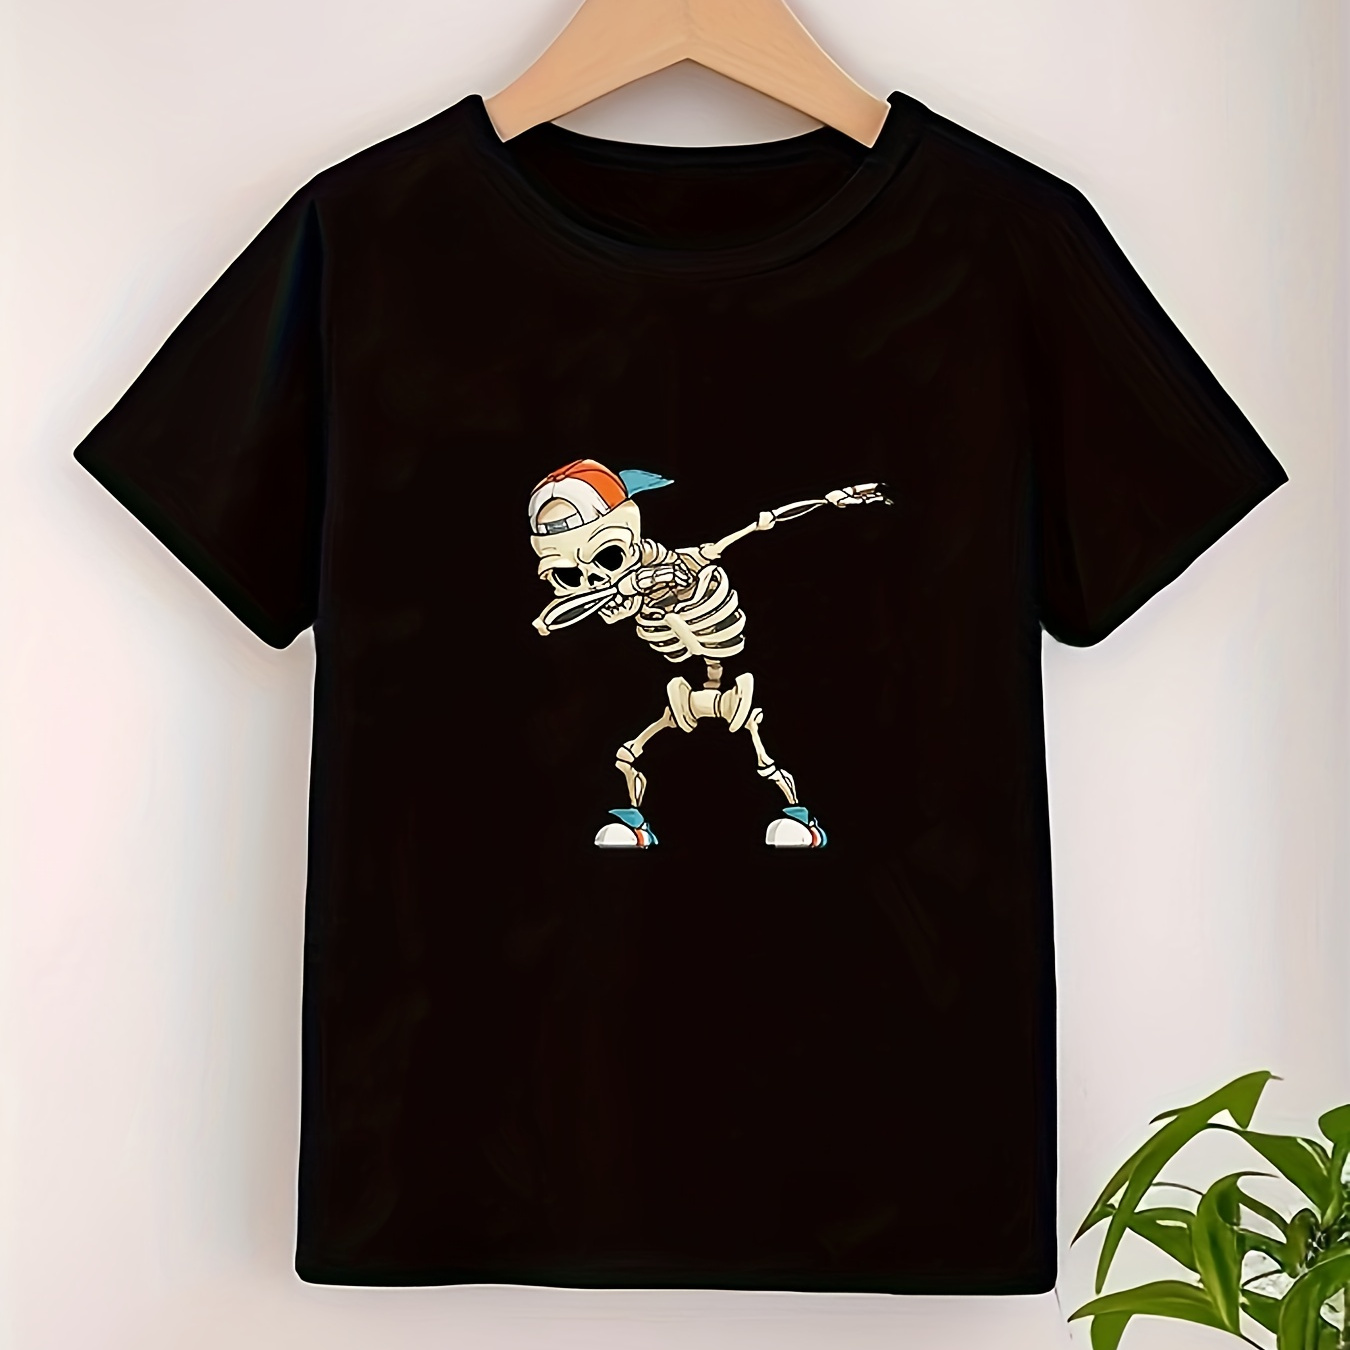 

Cool Cartoon Skeleton Graphic Print Tee, Boys Casual & Trendy T-shirt For Spring & Summer, Boys Clothes For Outdoor Activities